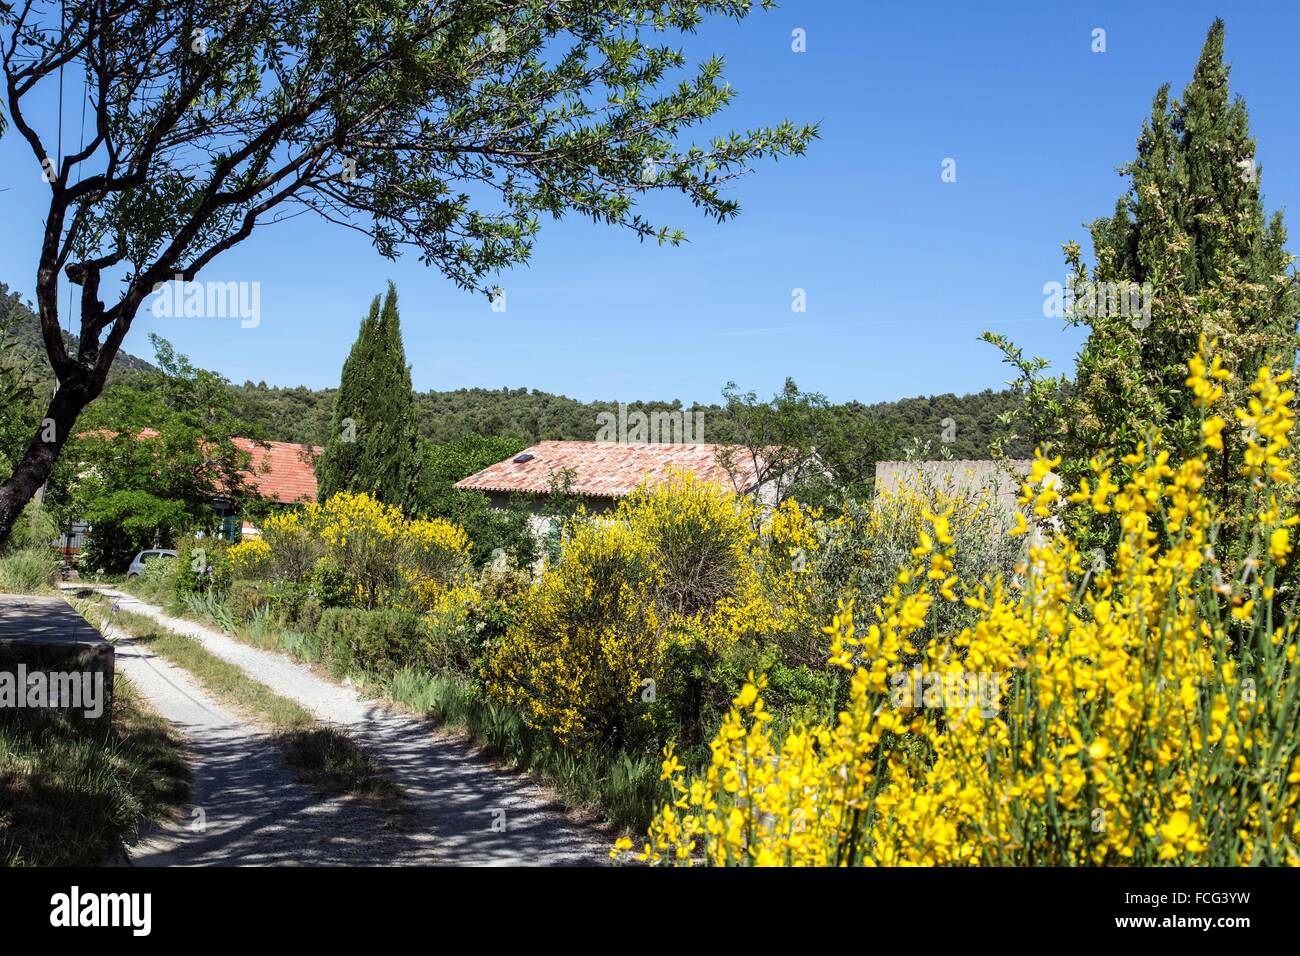 REGIONAL NATURE PARK OF THE LUBERON, FRANCE Stock Photo